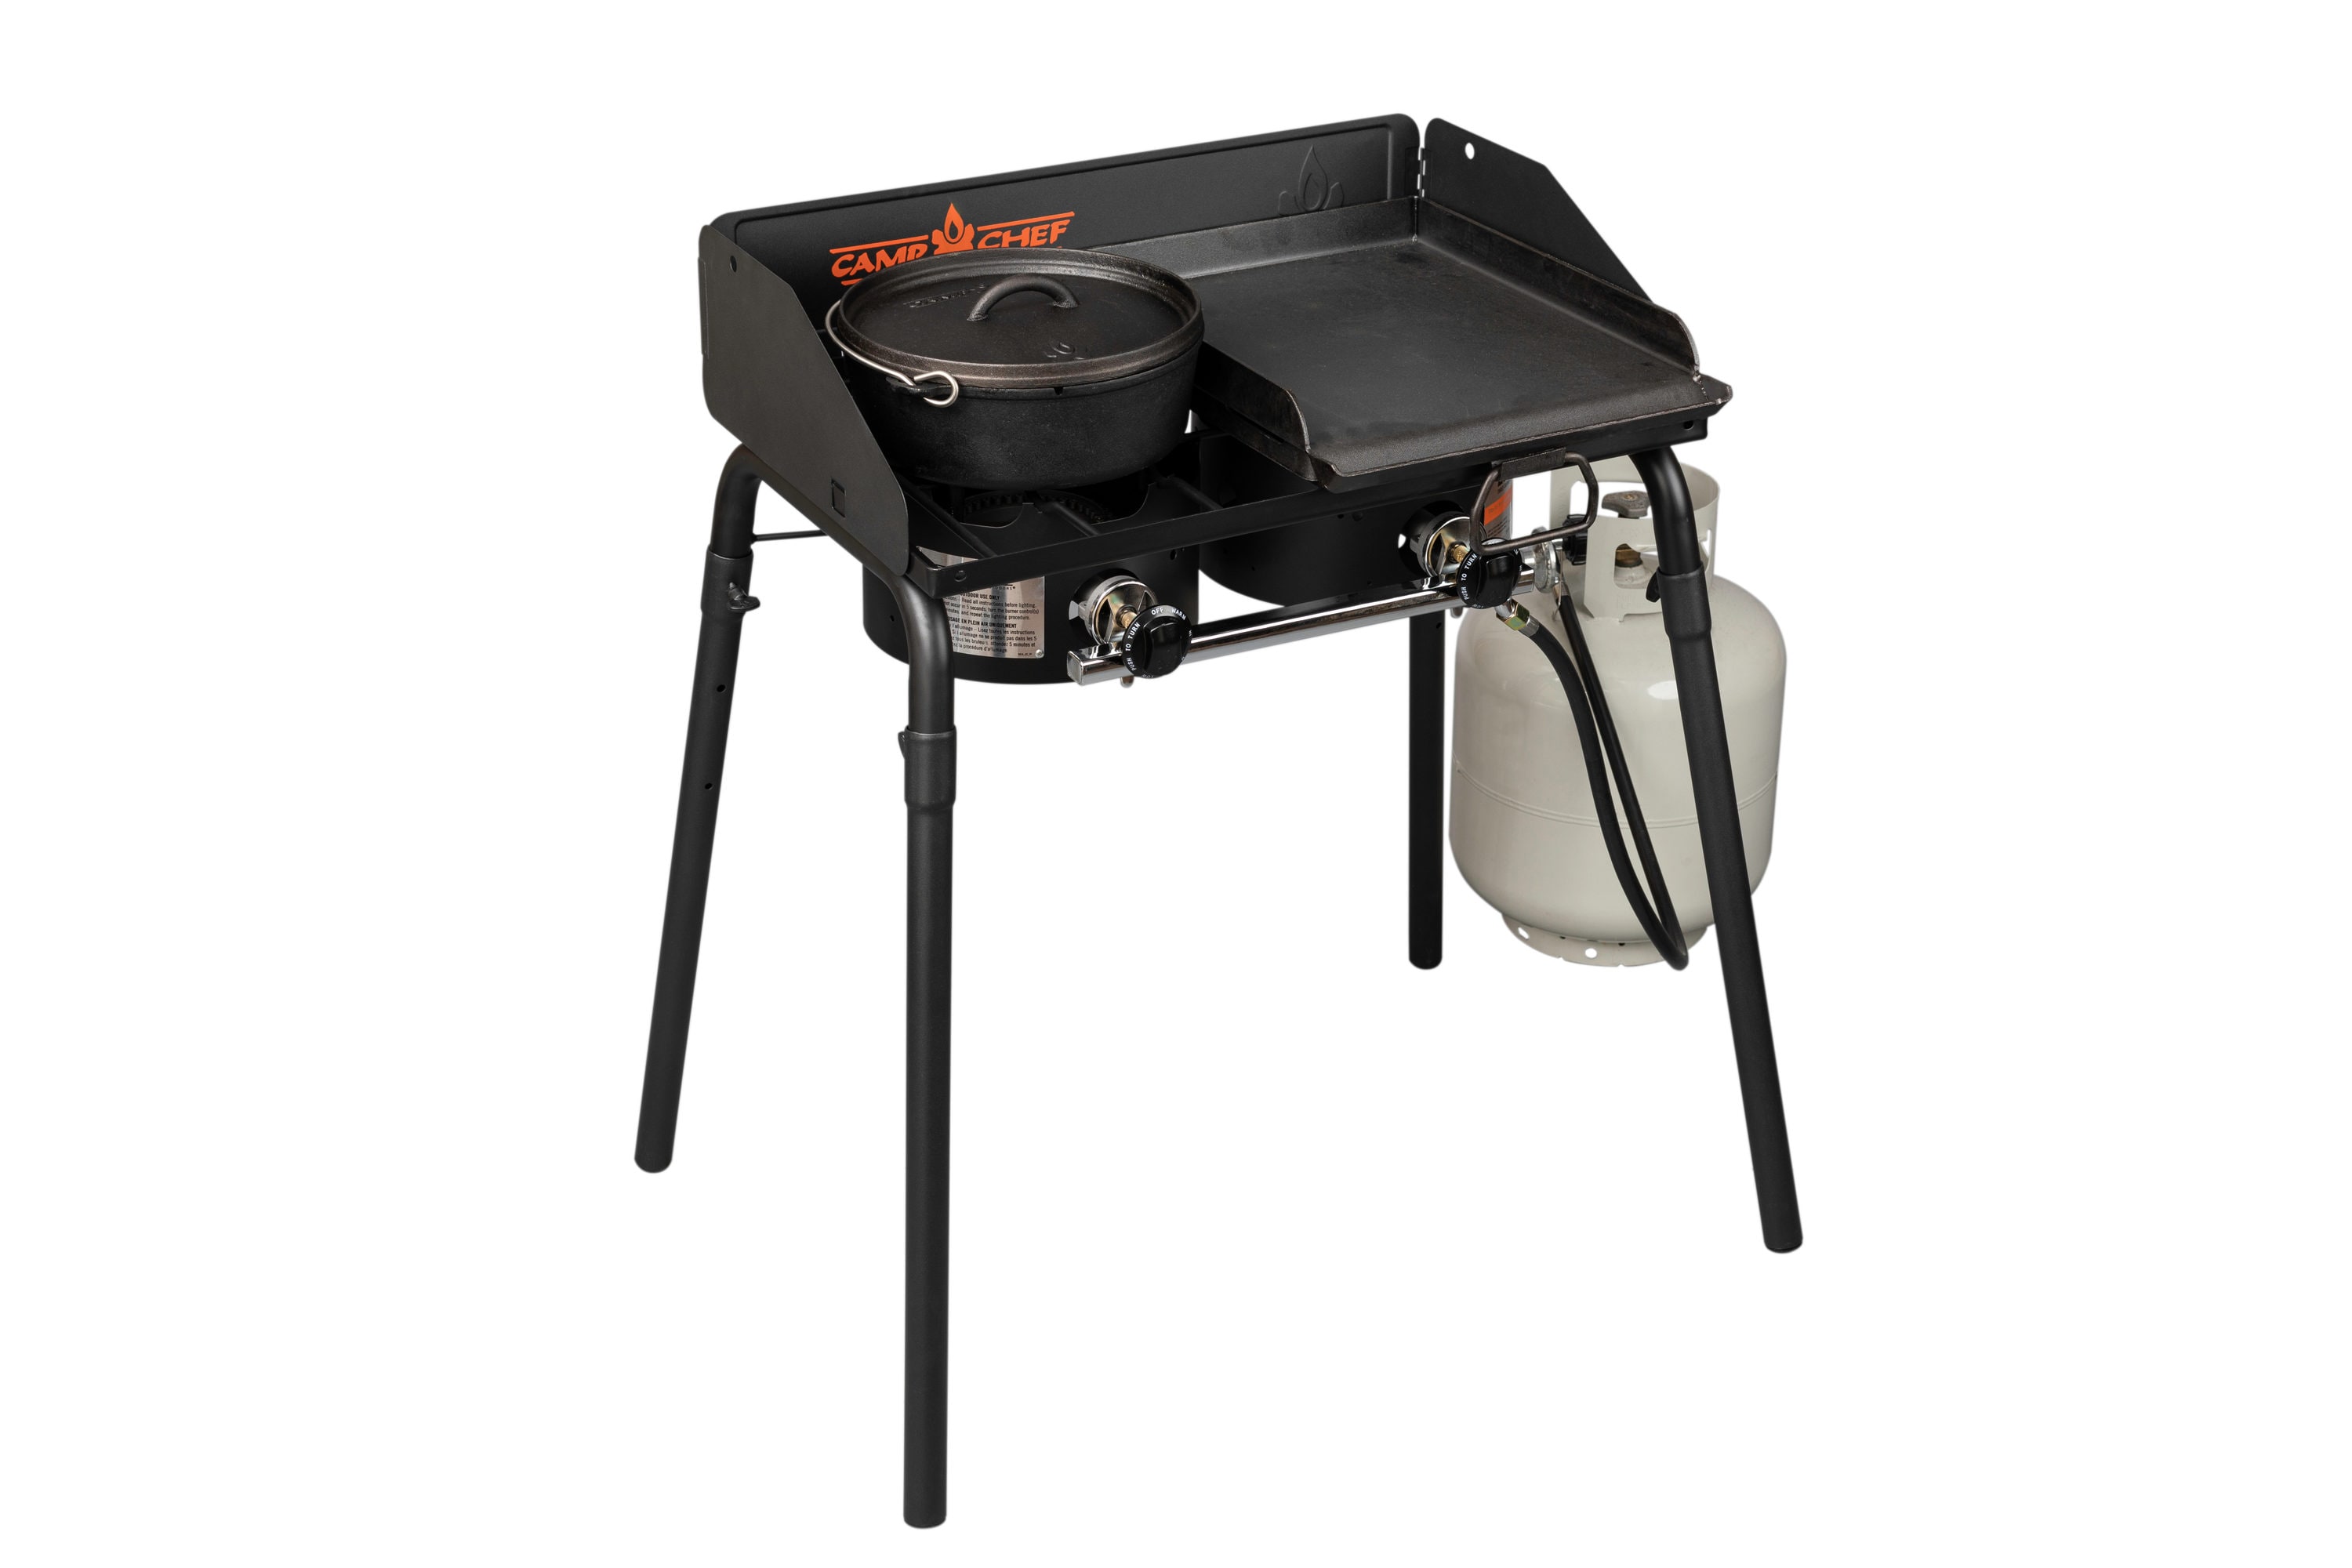 Reversible Griddle 16 x 24 and More | Camp Chef